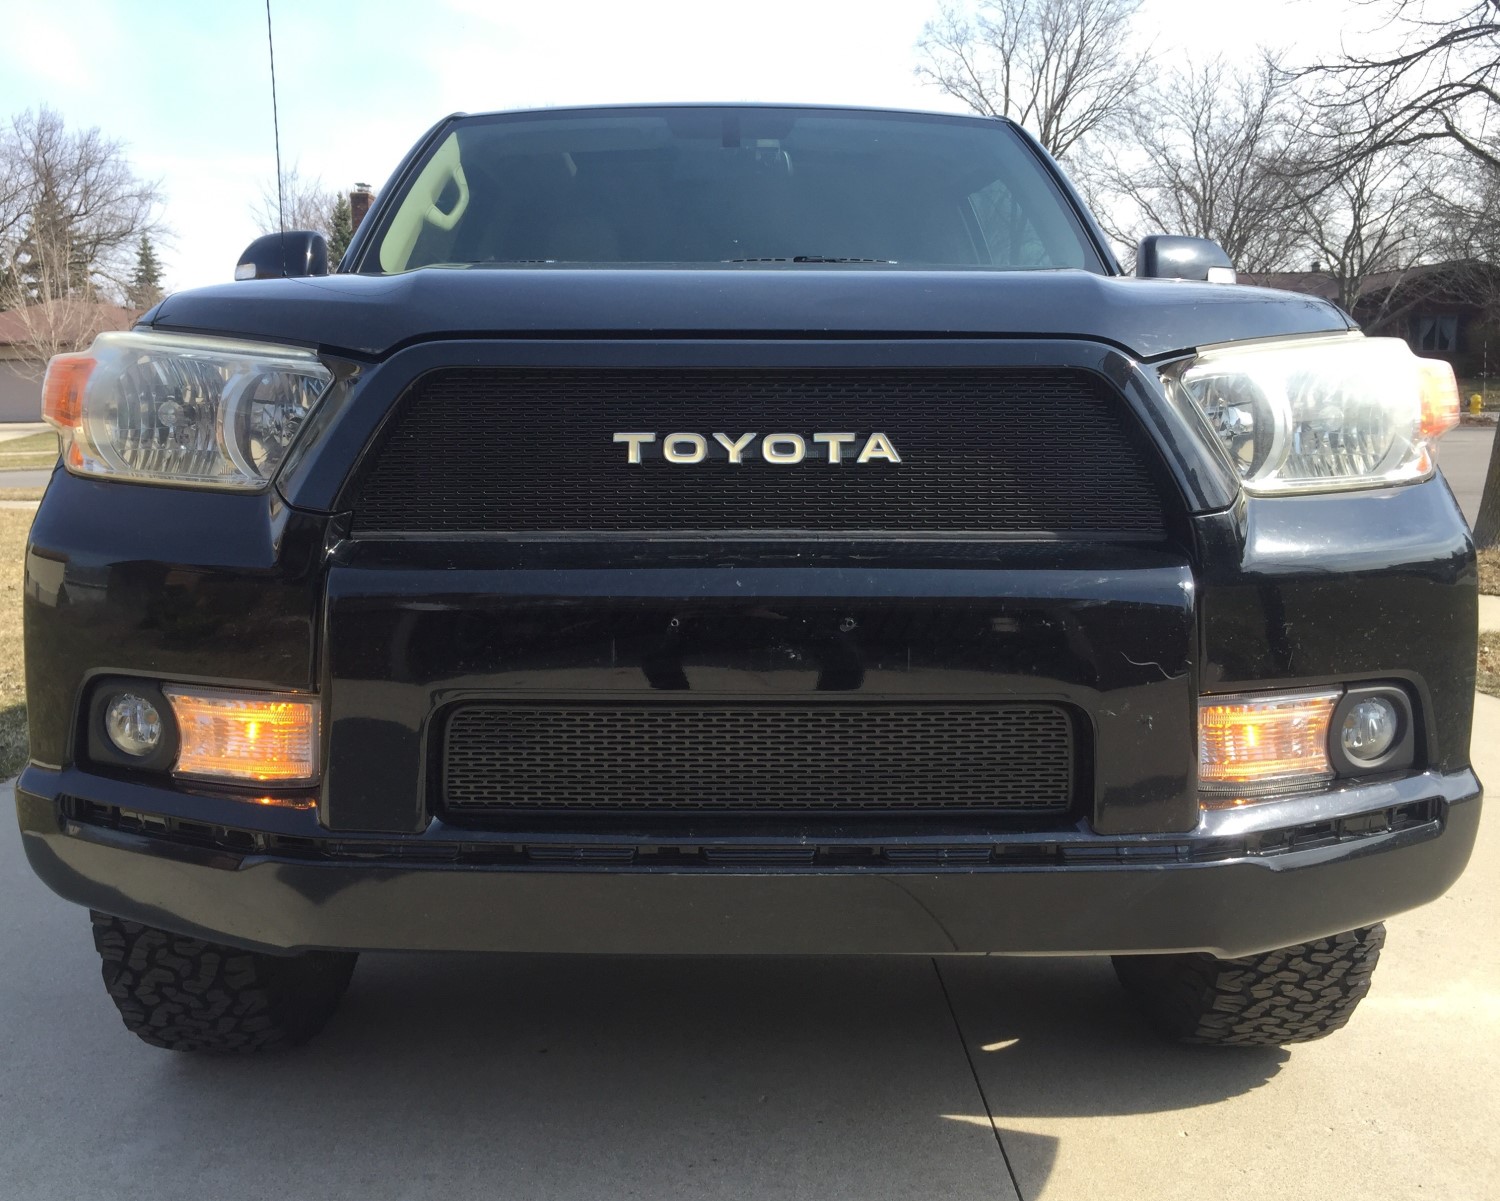 Retro Meets Contemporary: Gloss Black Slotted Grille for Toyota 4Runner